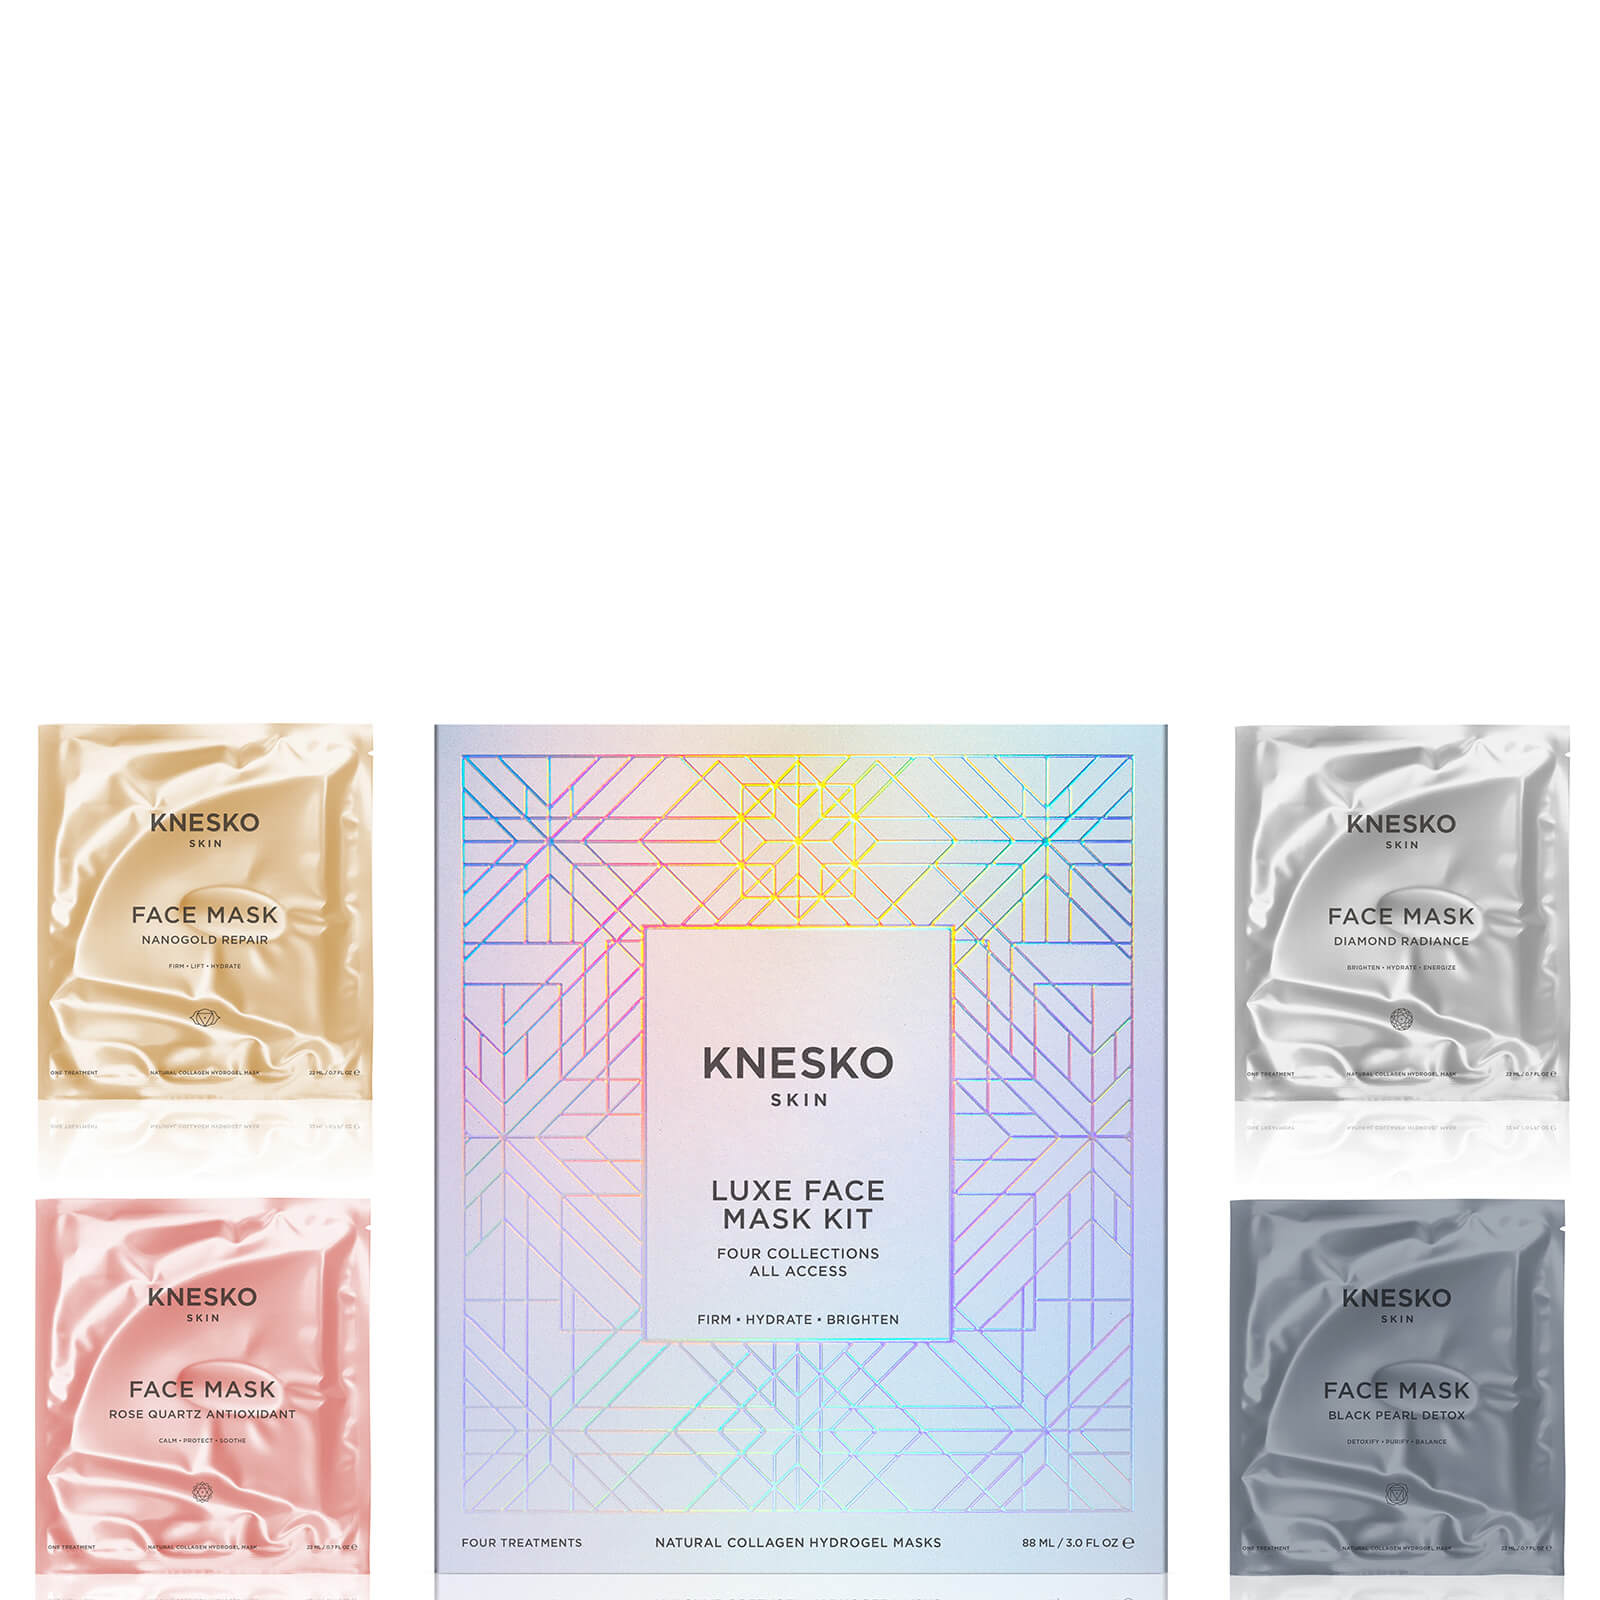 Knesko Skin The Luxe Face Mask Kit (worth $160.00)